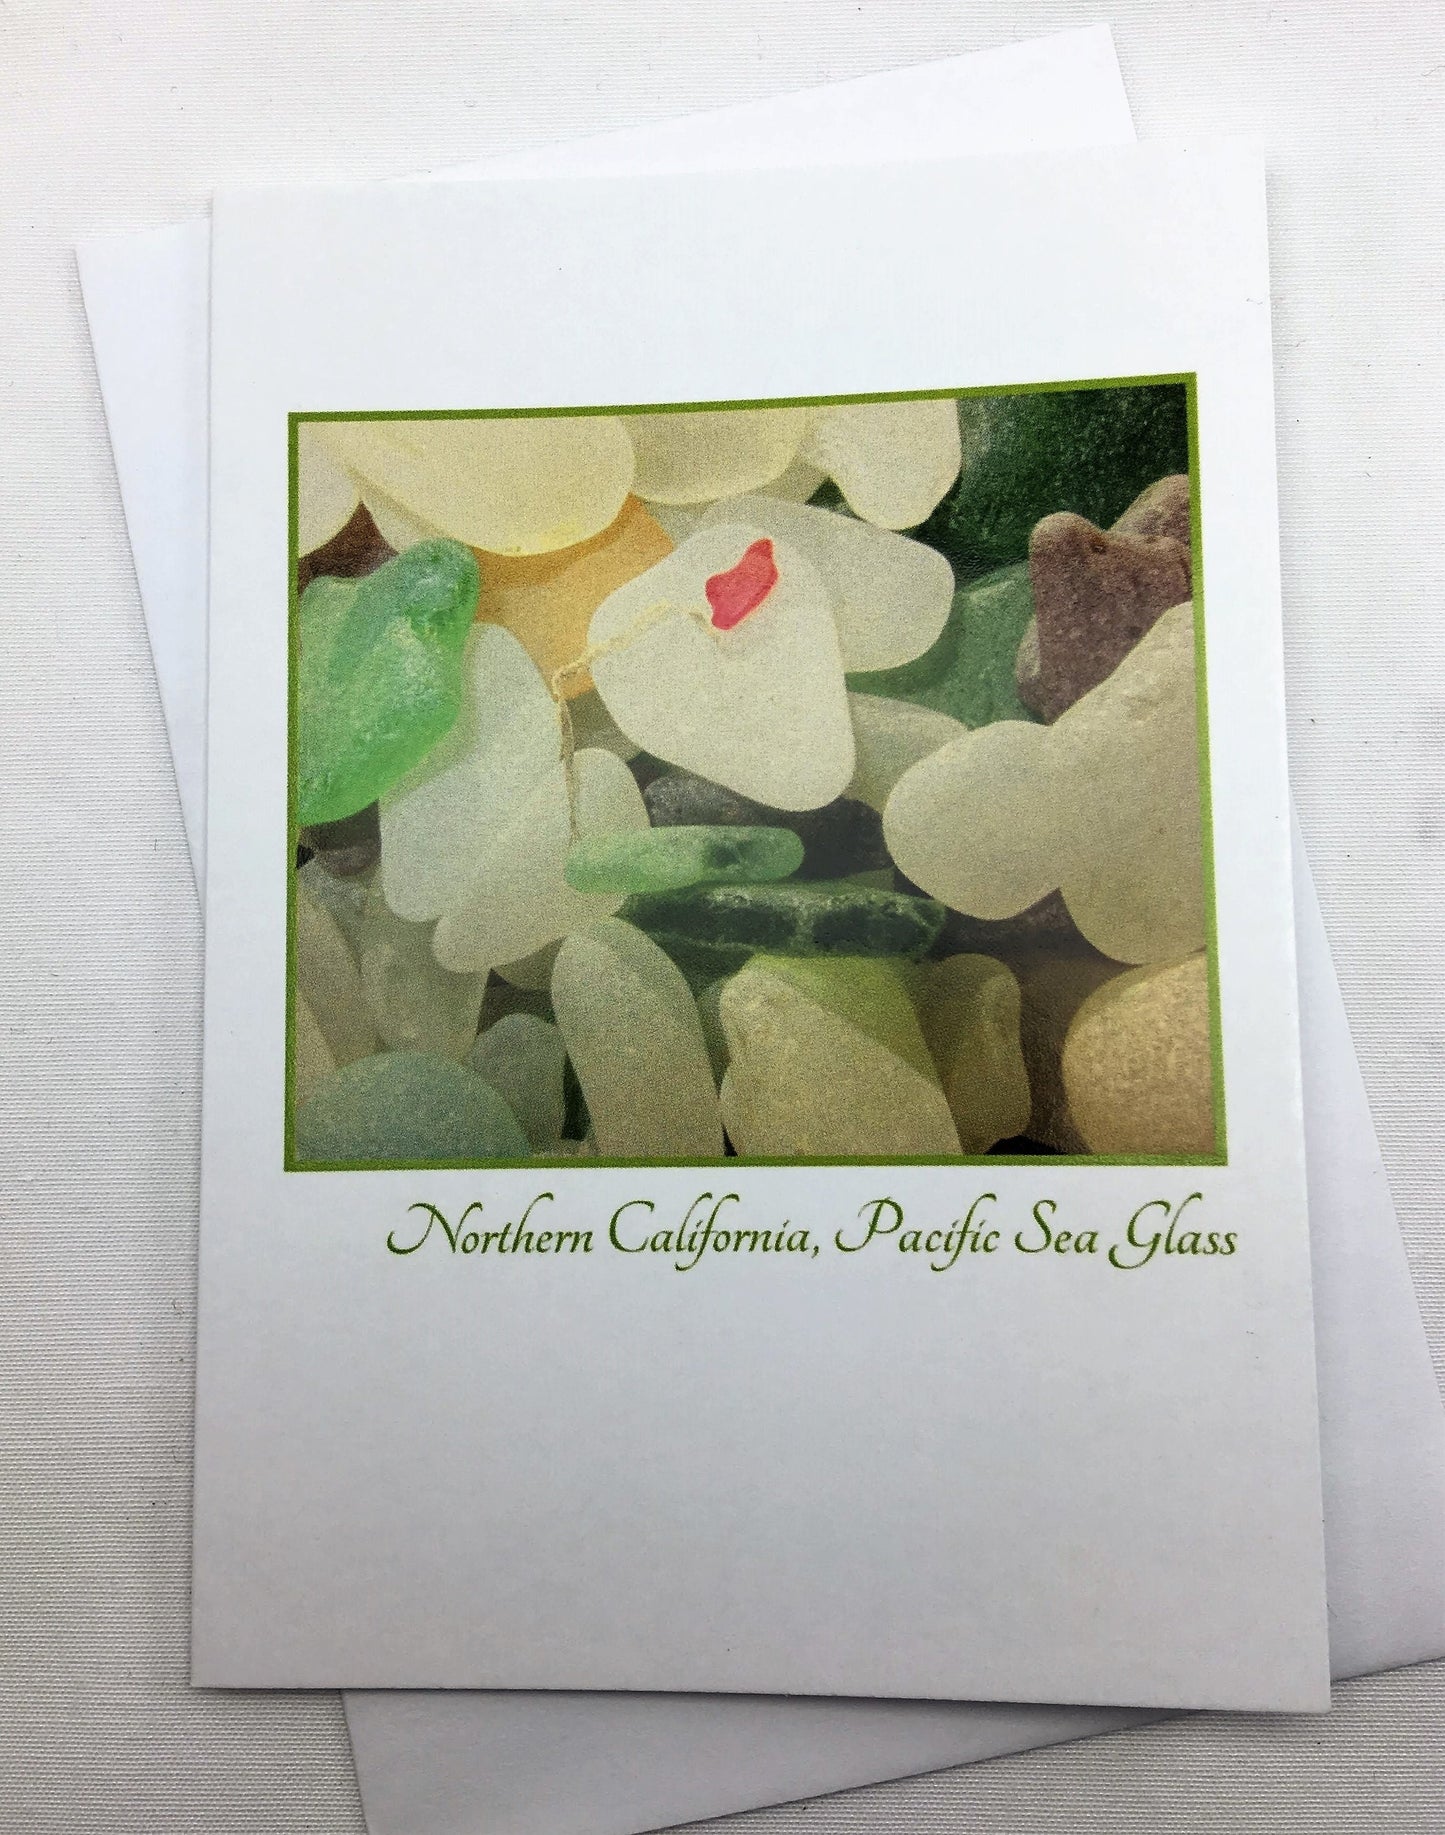 Set of 4 Note Cards - Nova Scotia and Northern California Sea Glass Collections (includes envelopes)